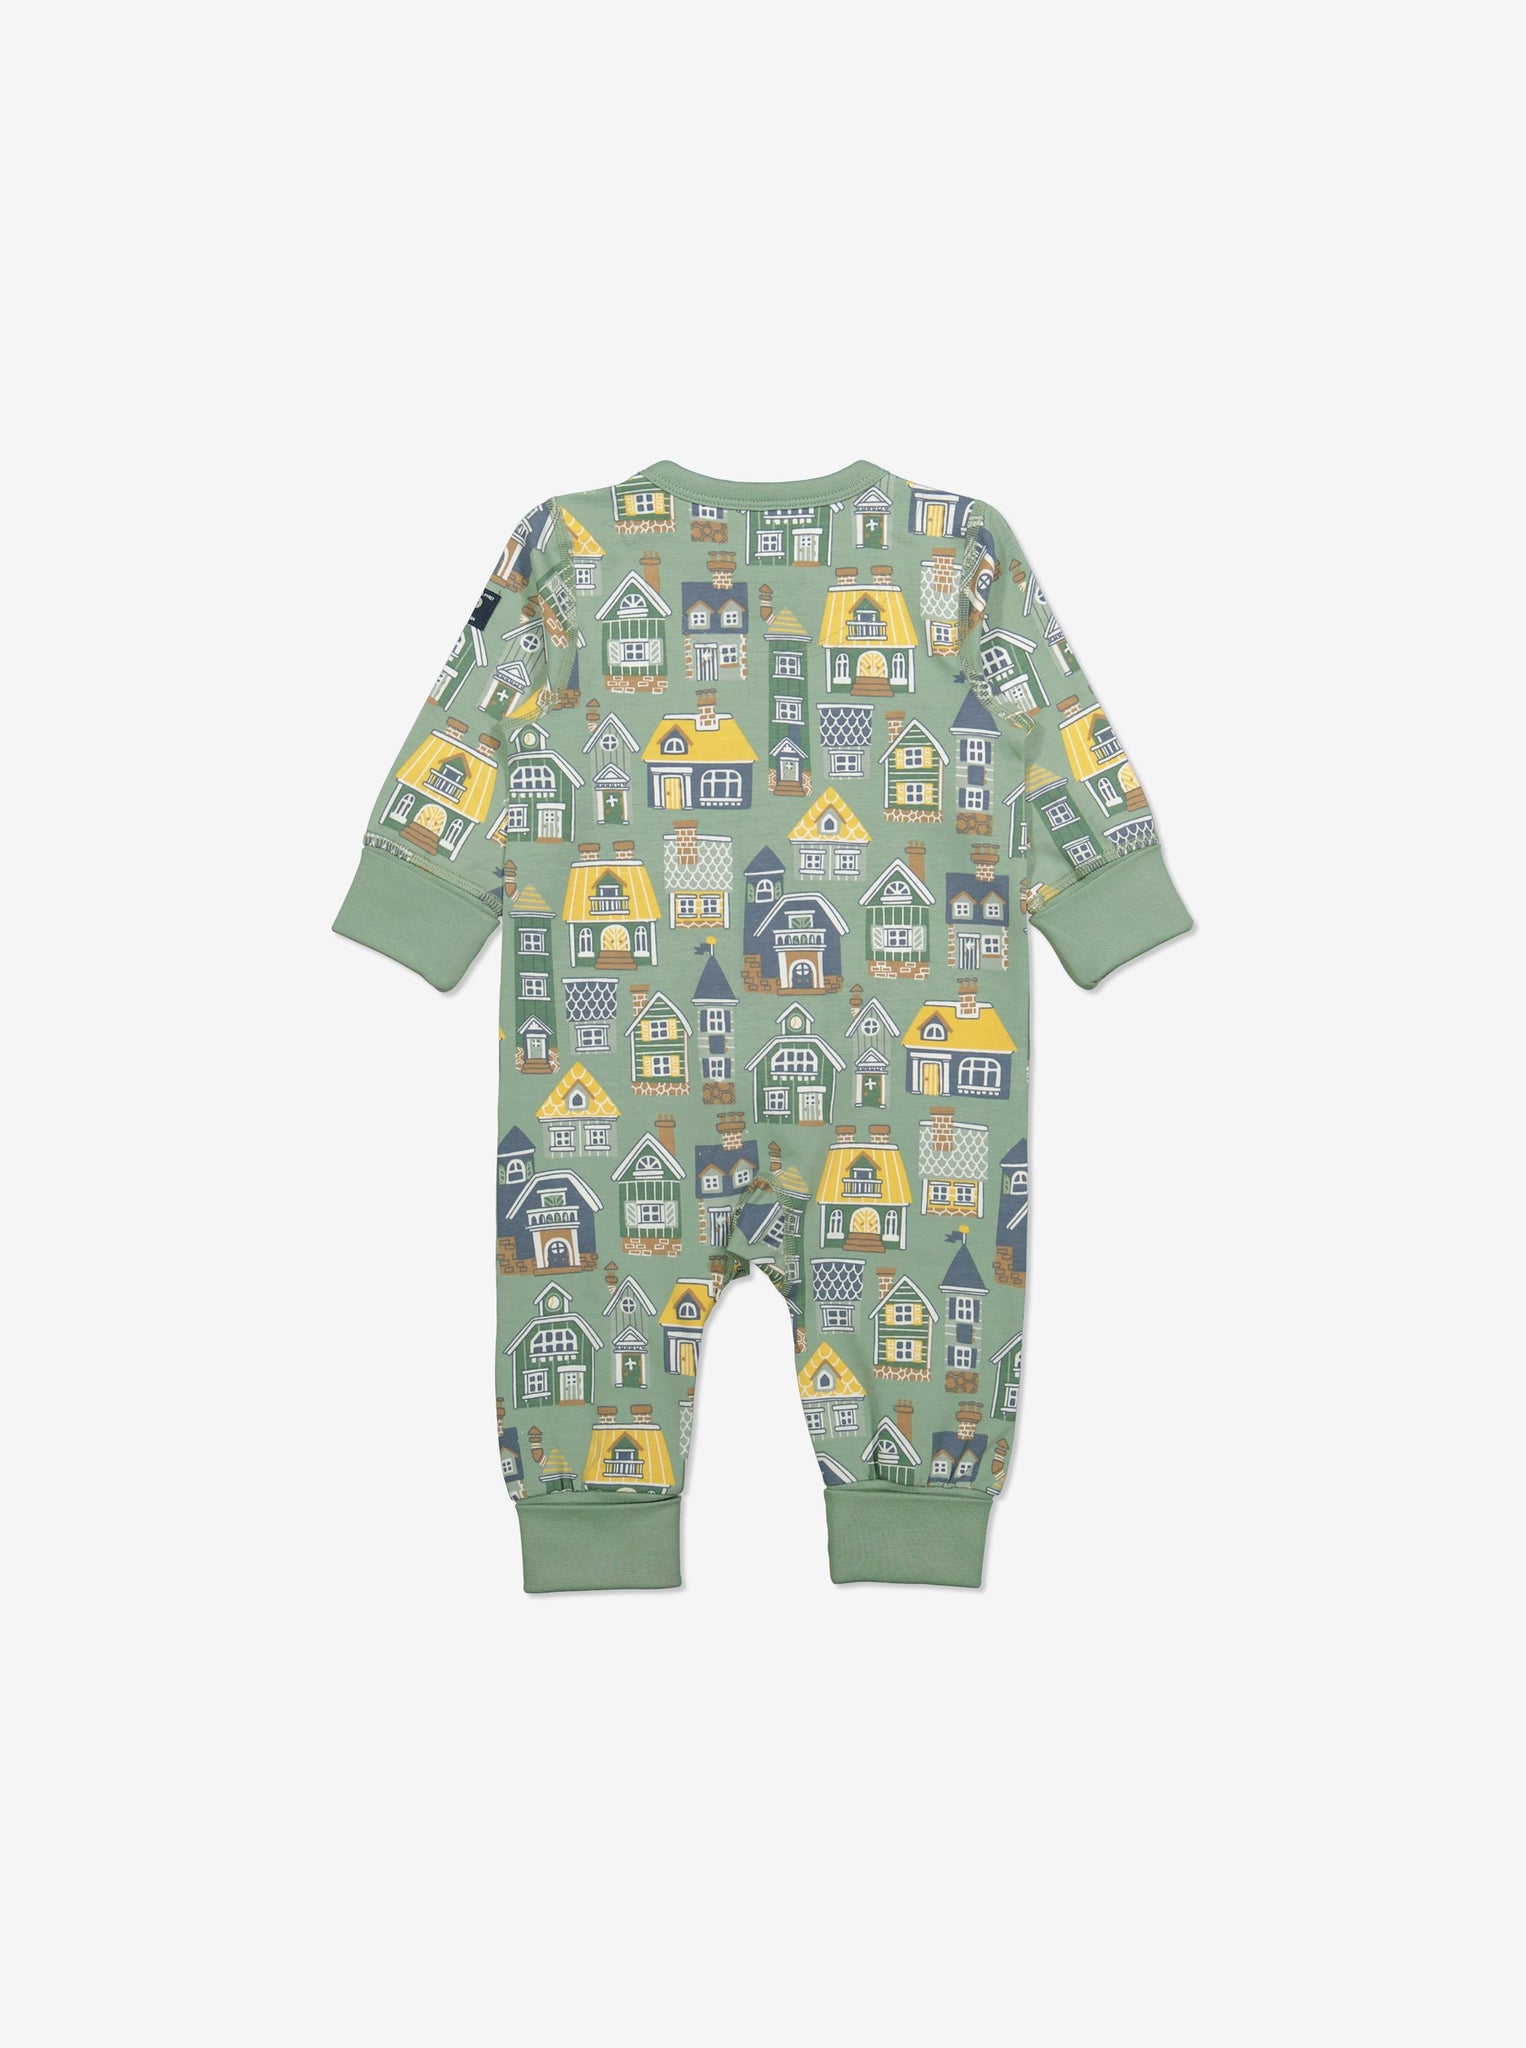  Organic Green Baby Sleepsuit from Polarn O. Pyret Kidswear. Made from ethically sourced materials.